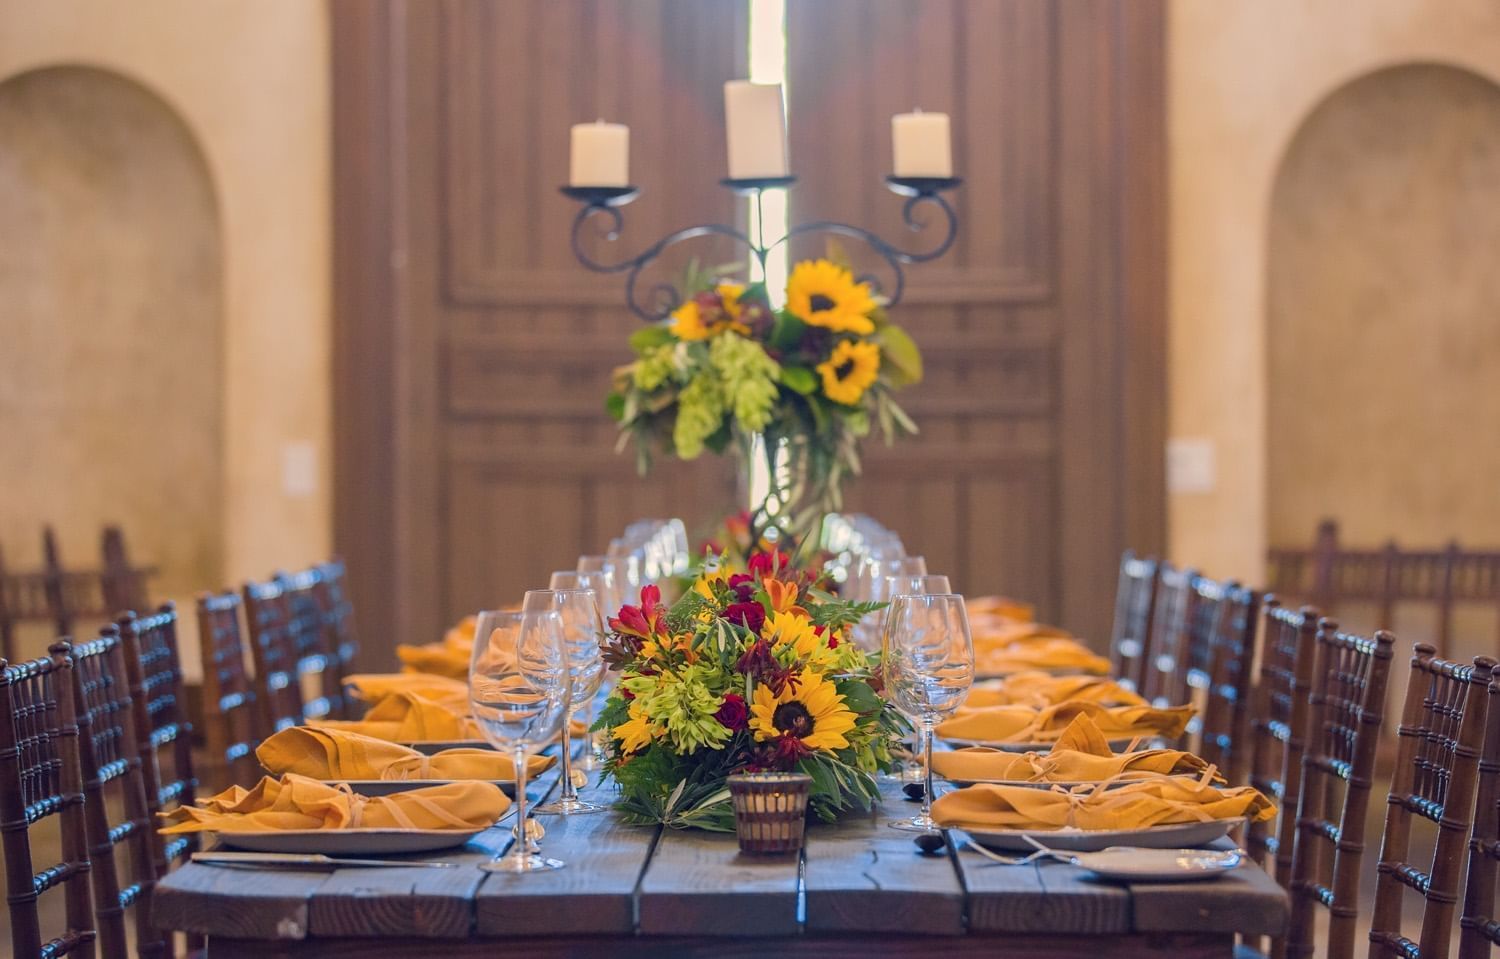 Private dining room area with sunflower center pieces at Allegre